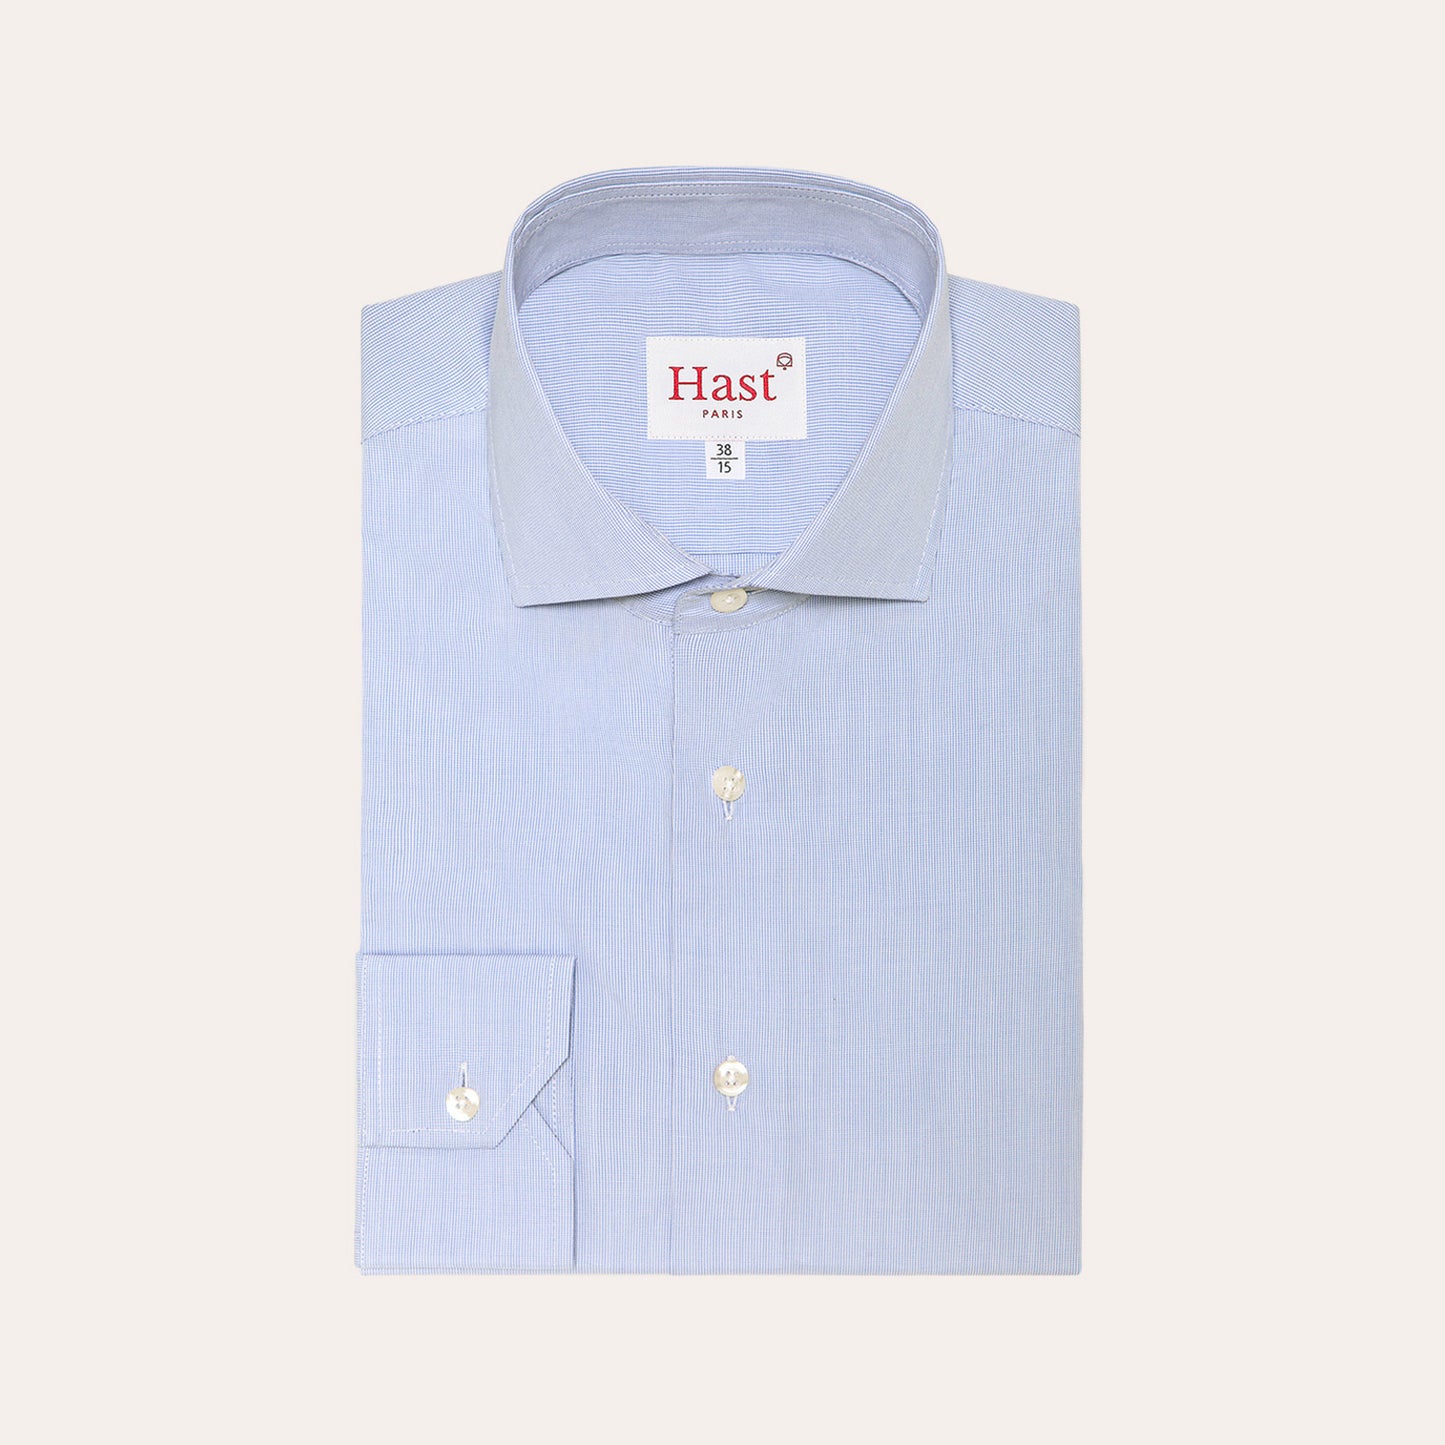 Fitted shirt in faux-plain double-twisted poplin with blue checks